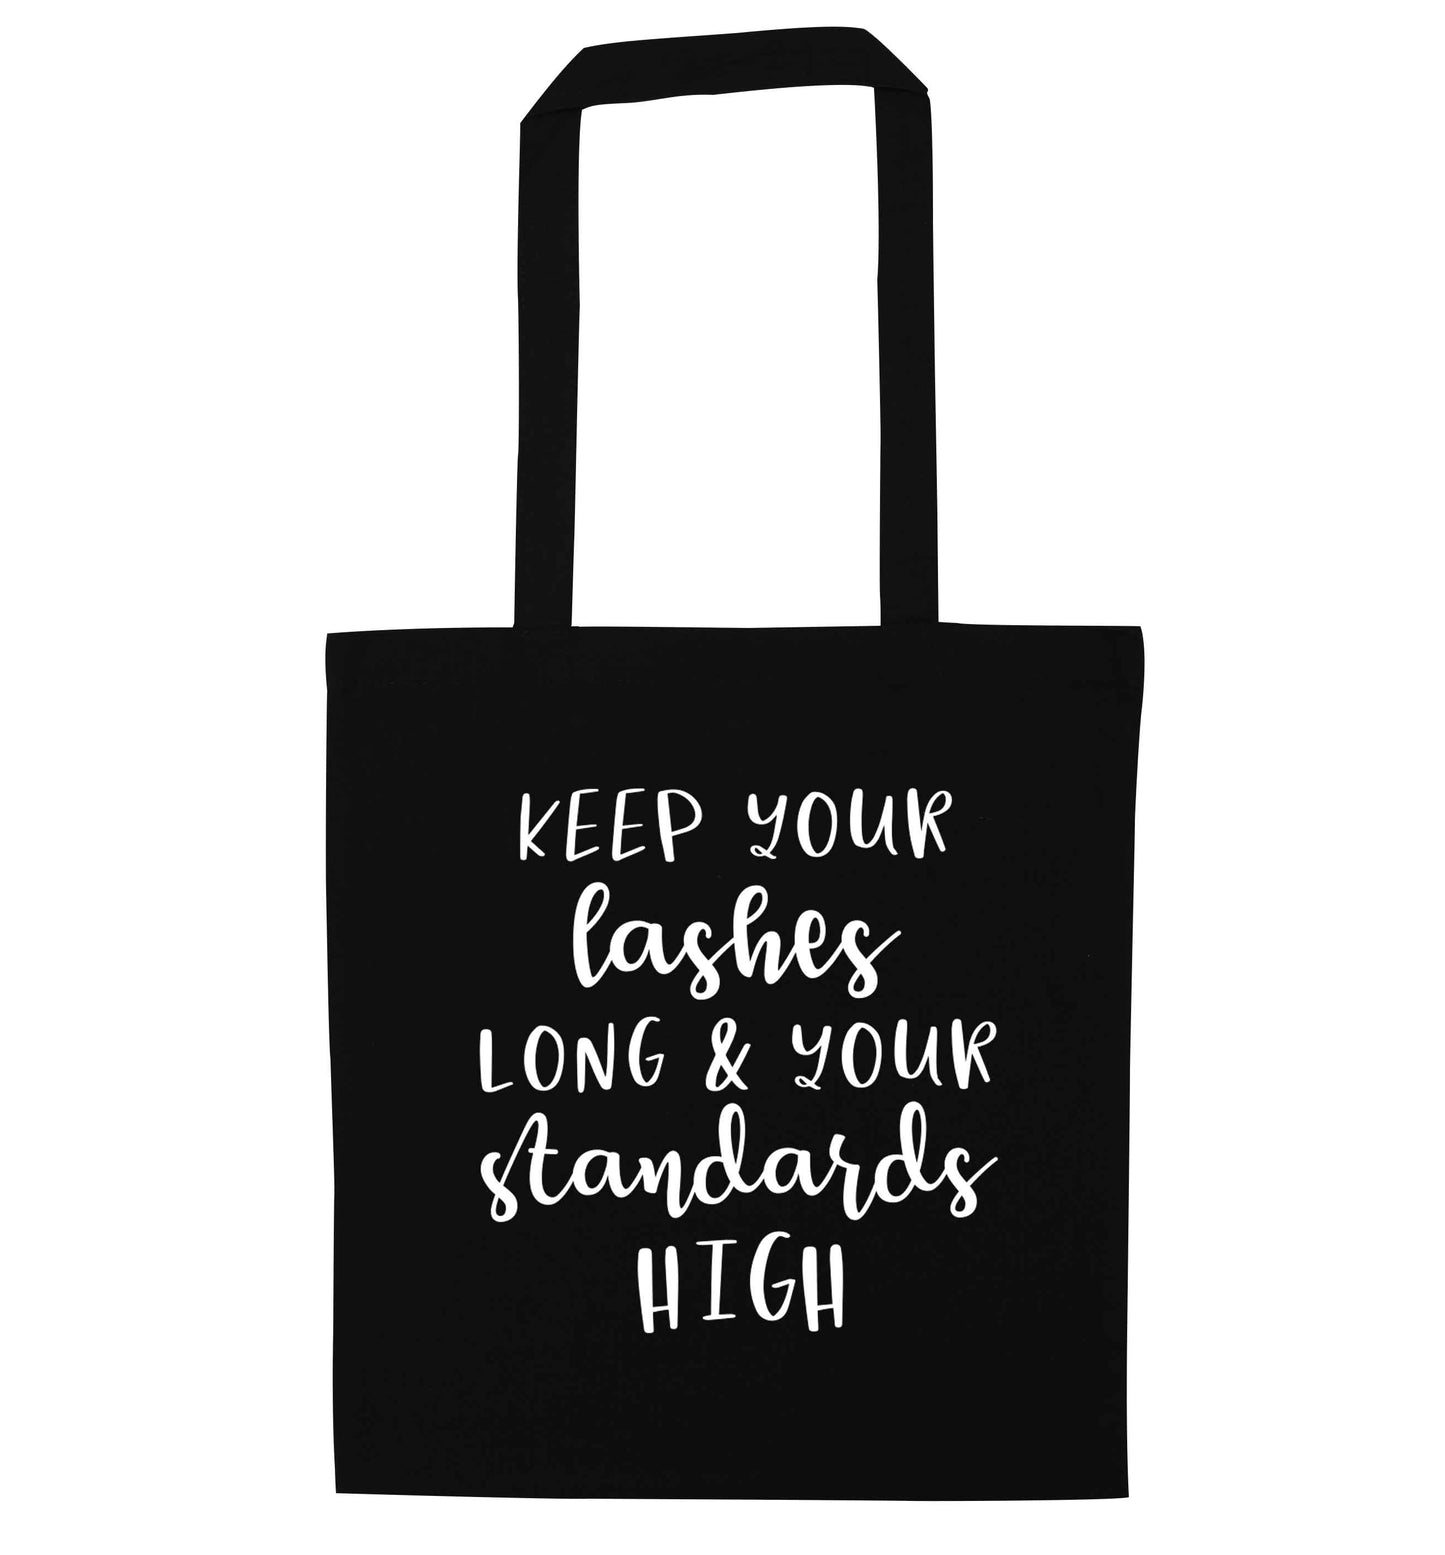 Keep your lashes long and your standards high black tote bag